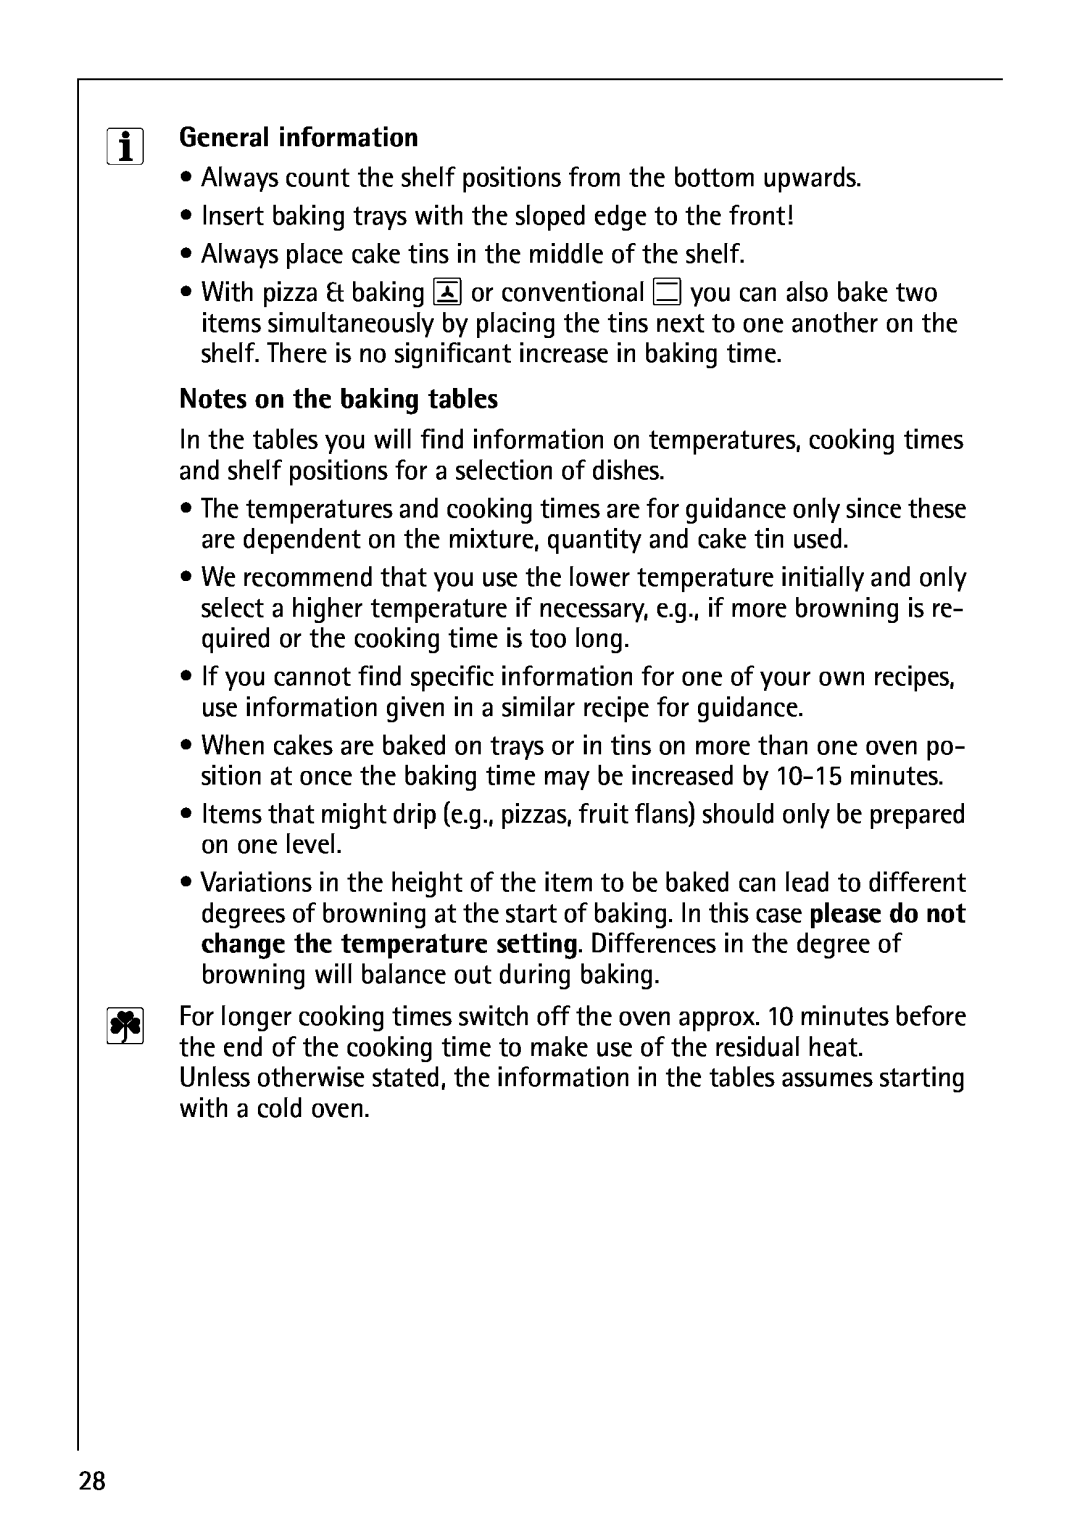 AEG B4130-1 operating instructions Notes on the baking tables, General information 